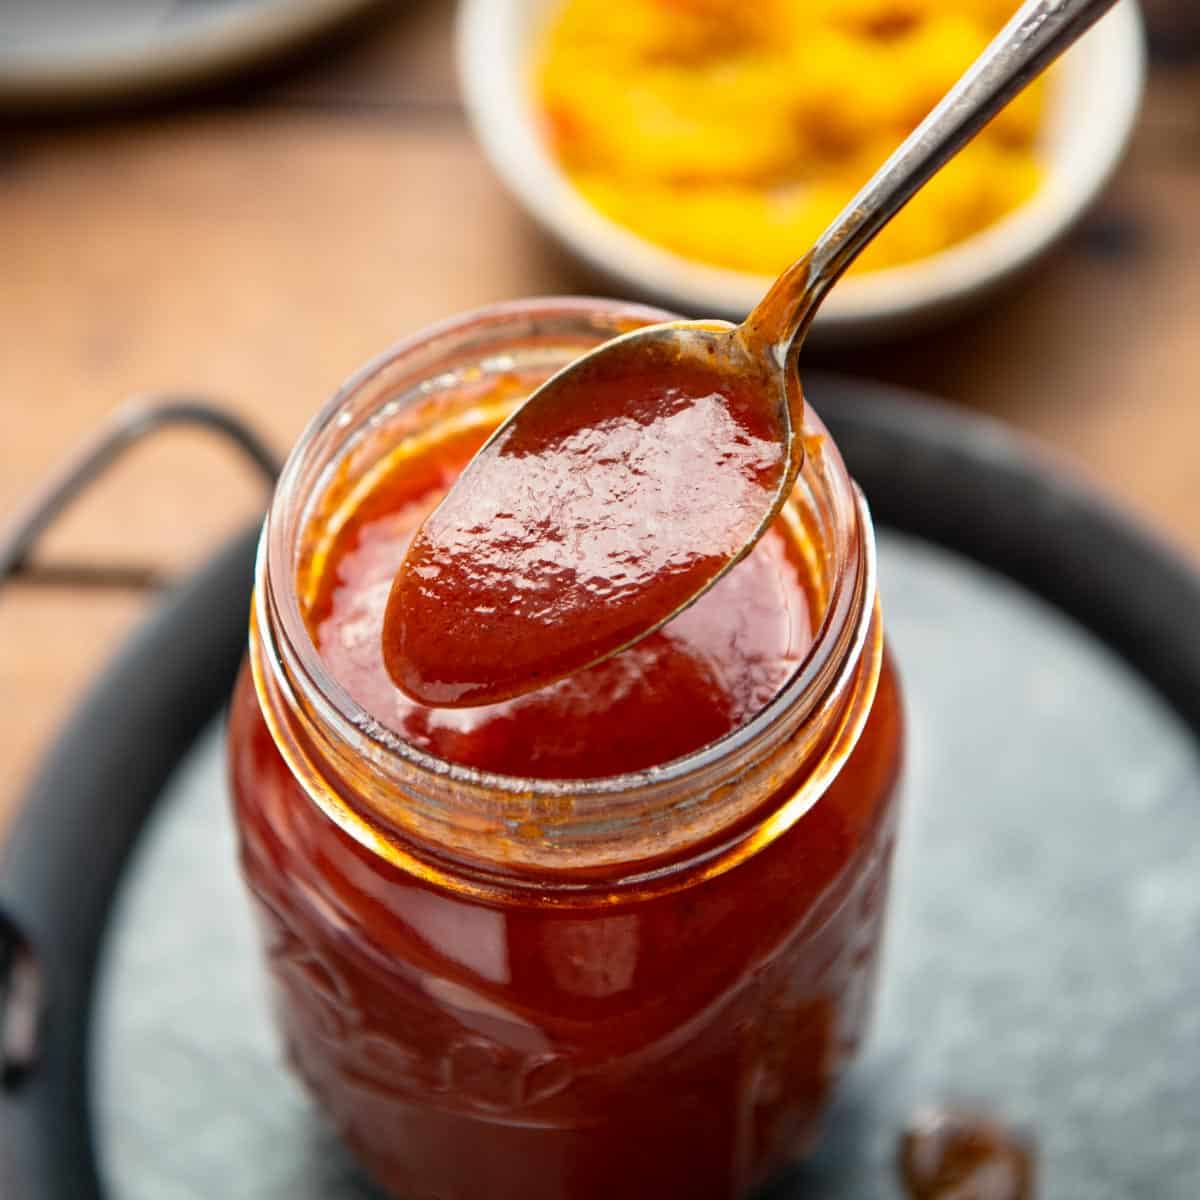 Spoon in a jar of homemade maple bbq sauce.